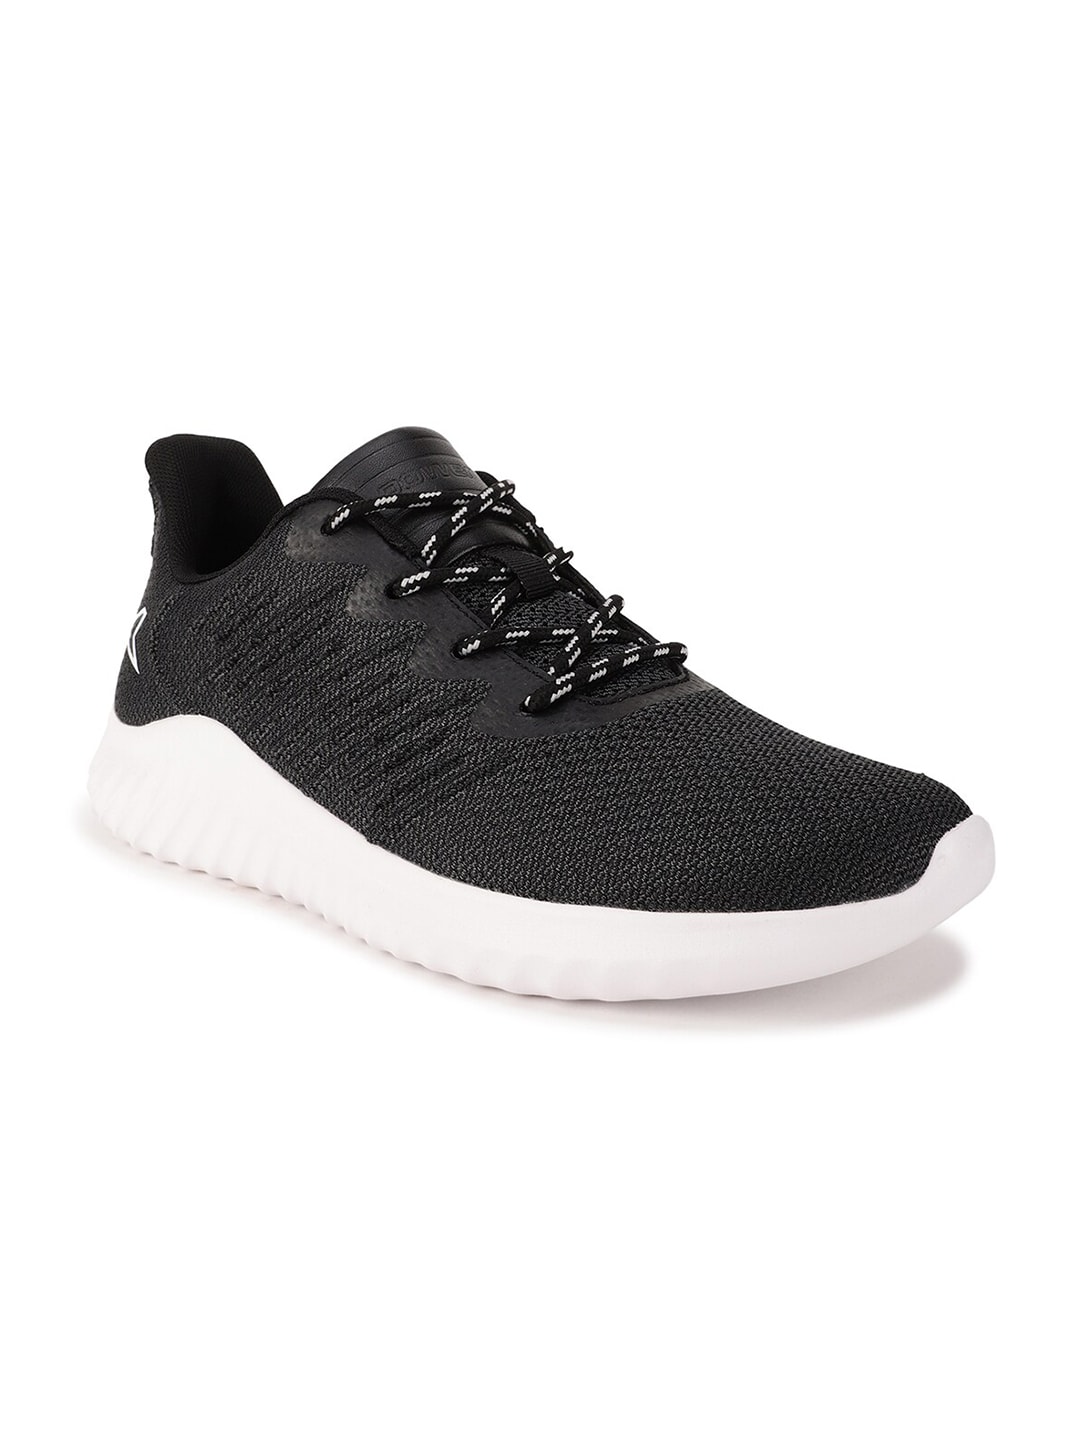 Power Women Black Textile Road Running Non-Marking Shoes Price in India